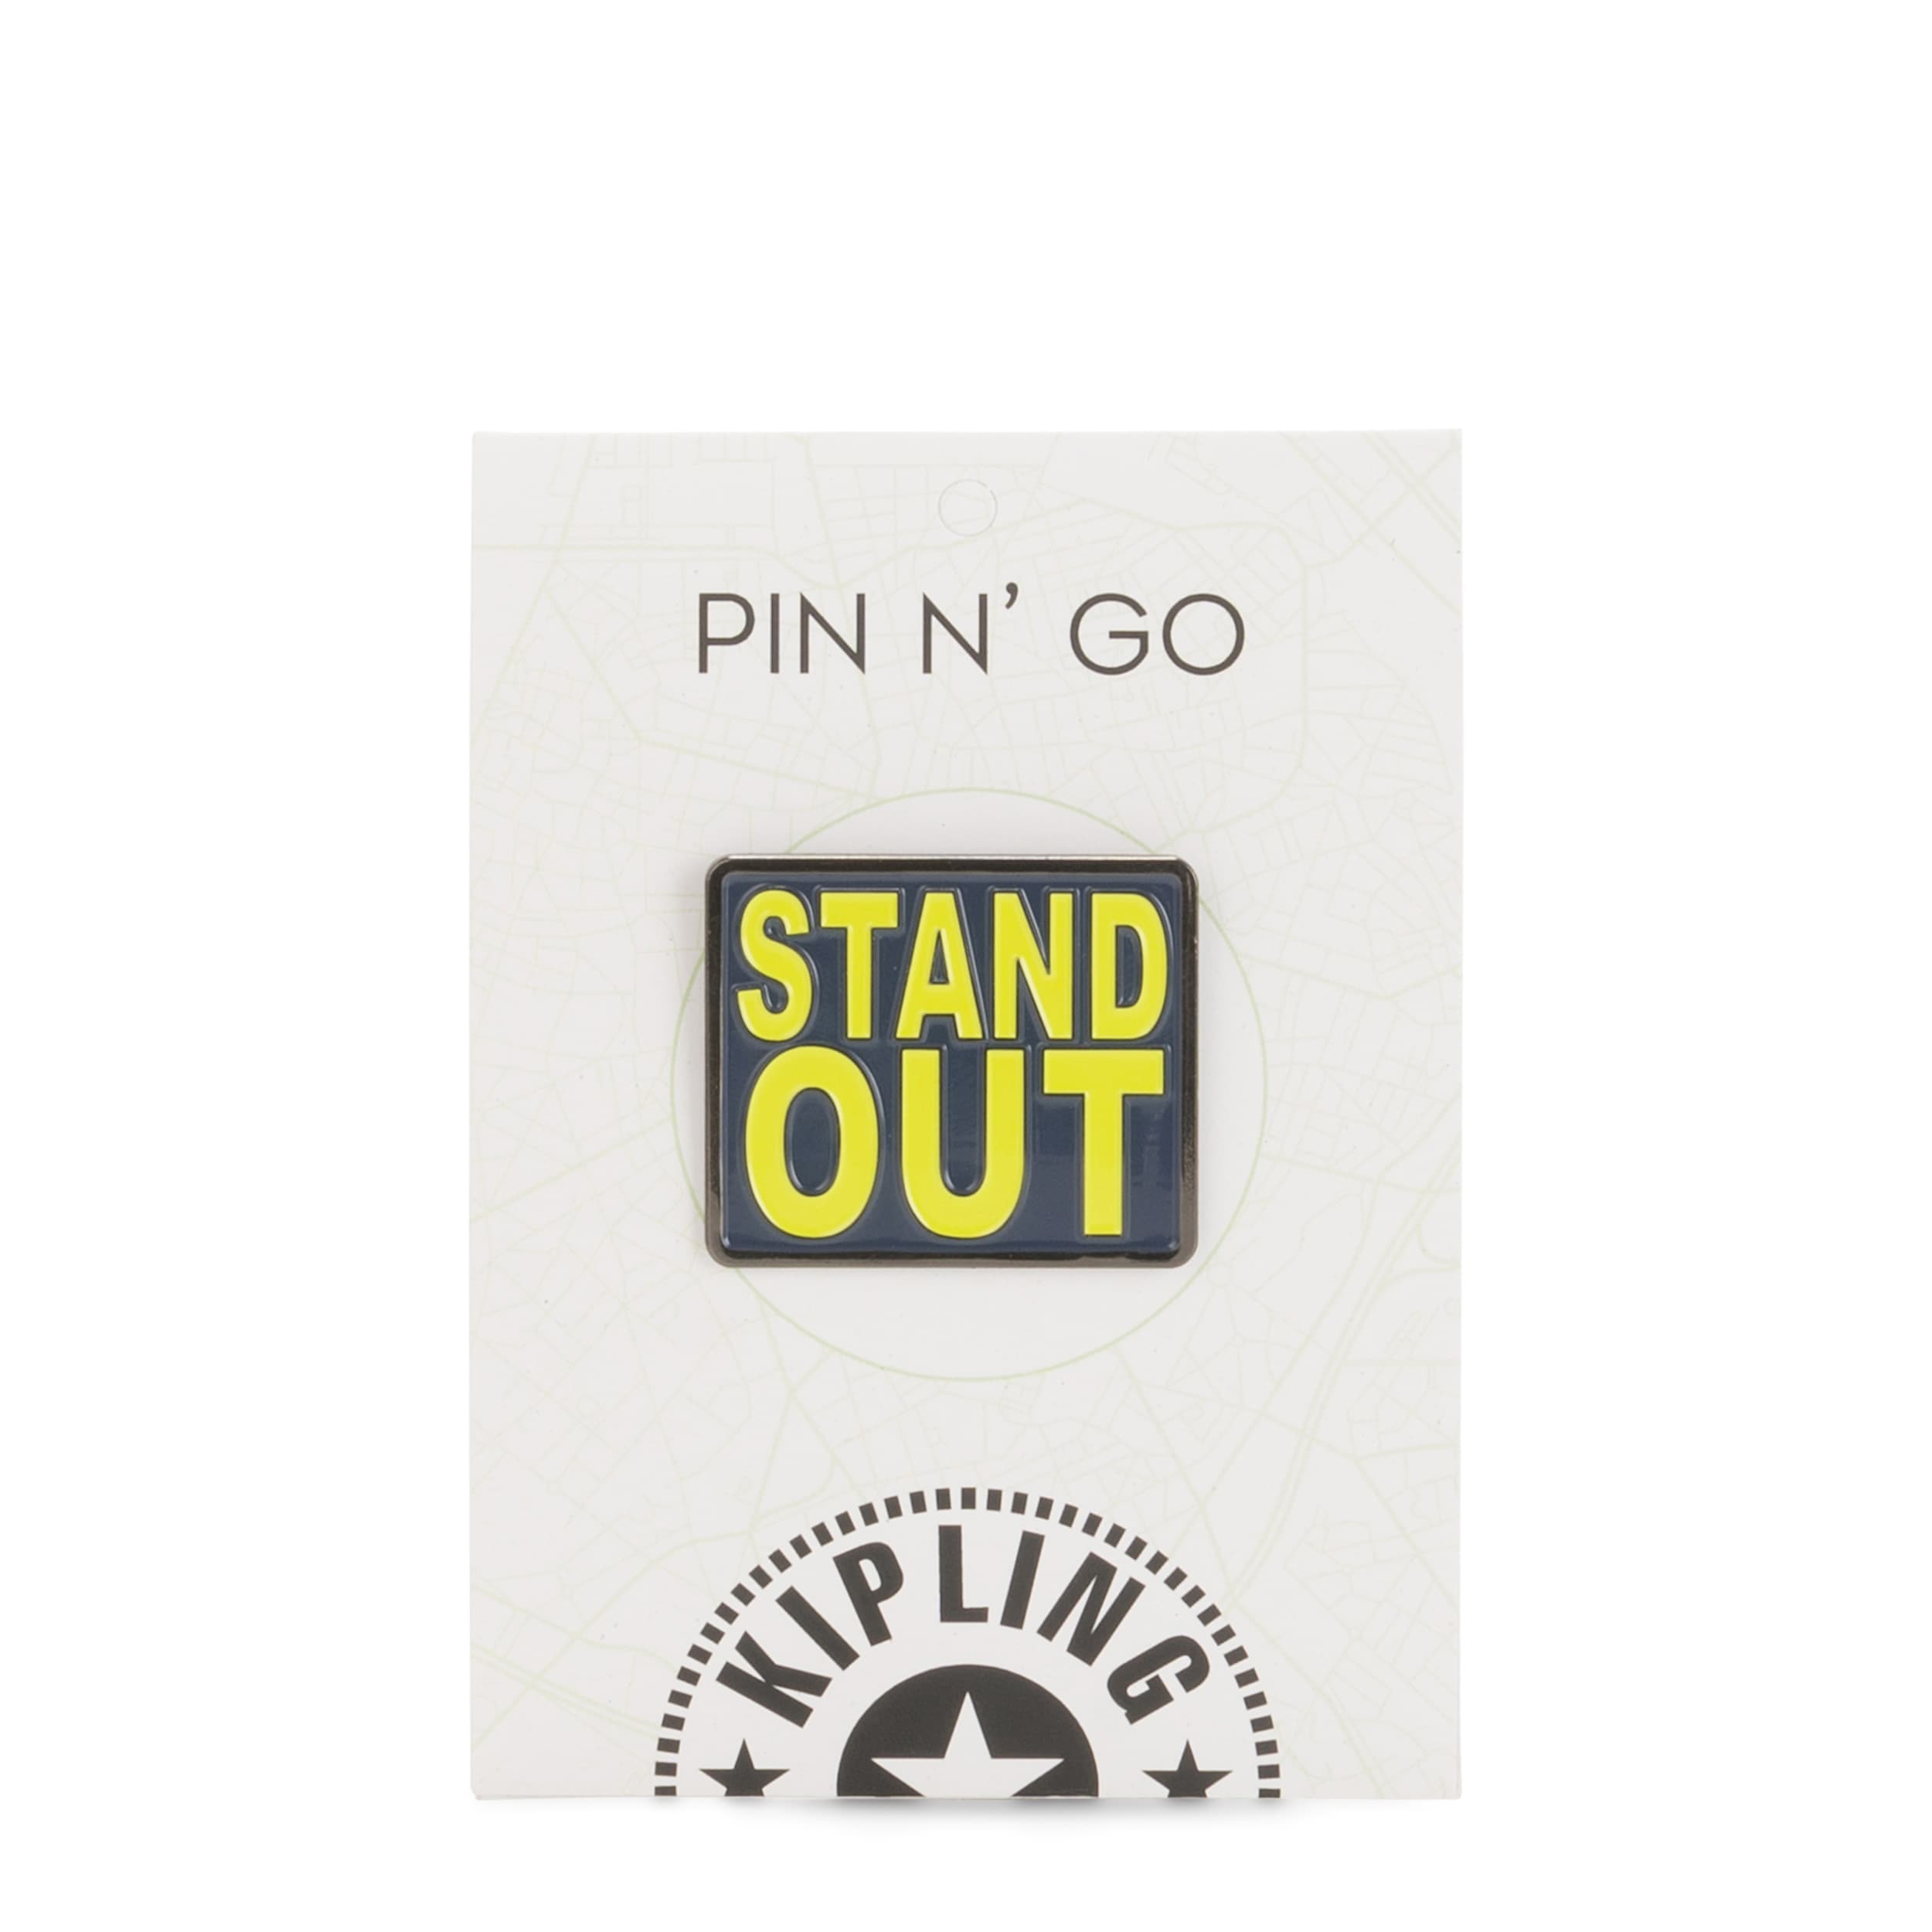 Kipling-Stand Out Pin-Small Personalisation Pin-Mix Col Ss20-I7233-Q54